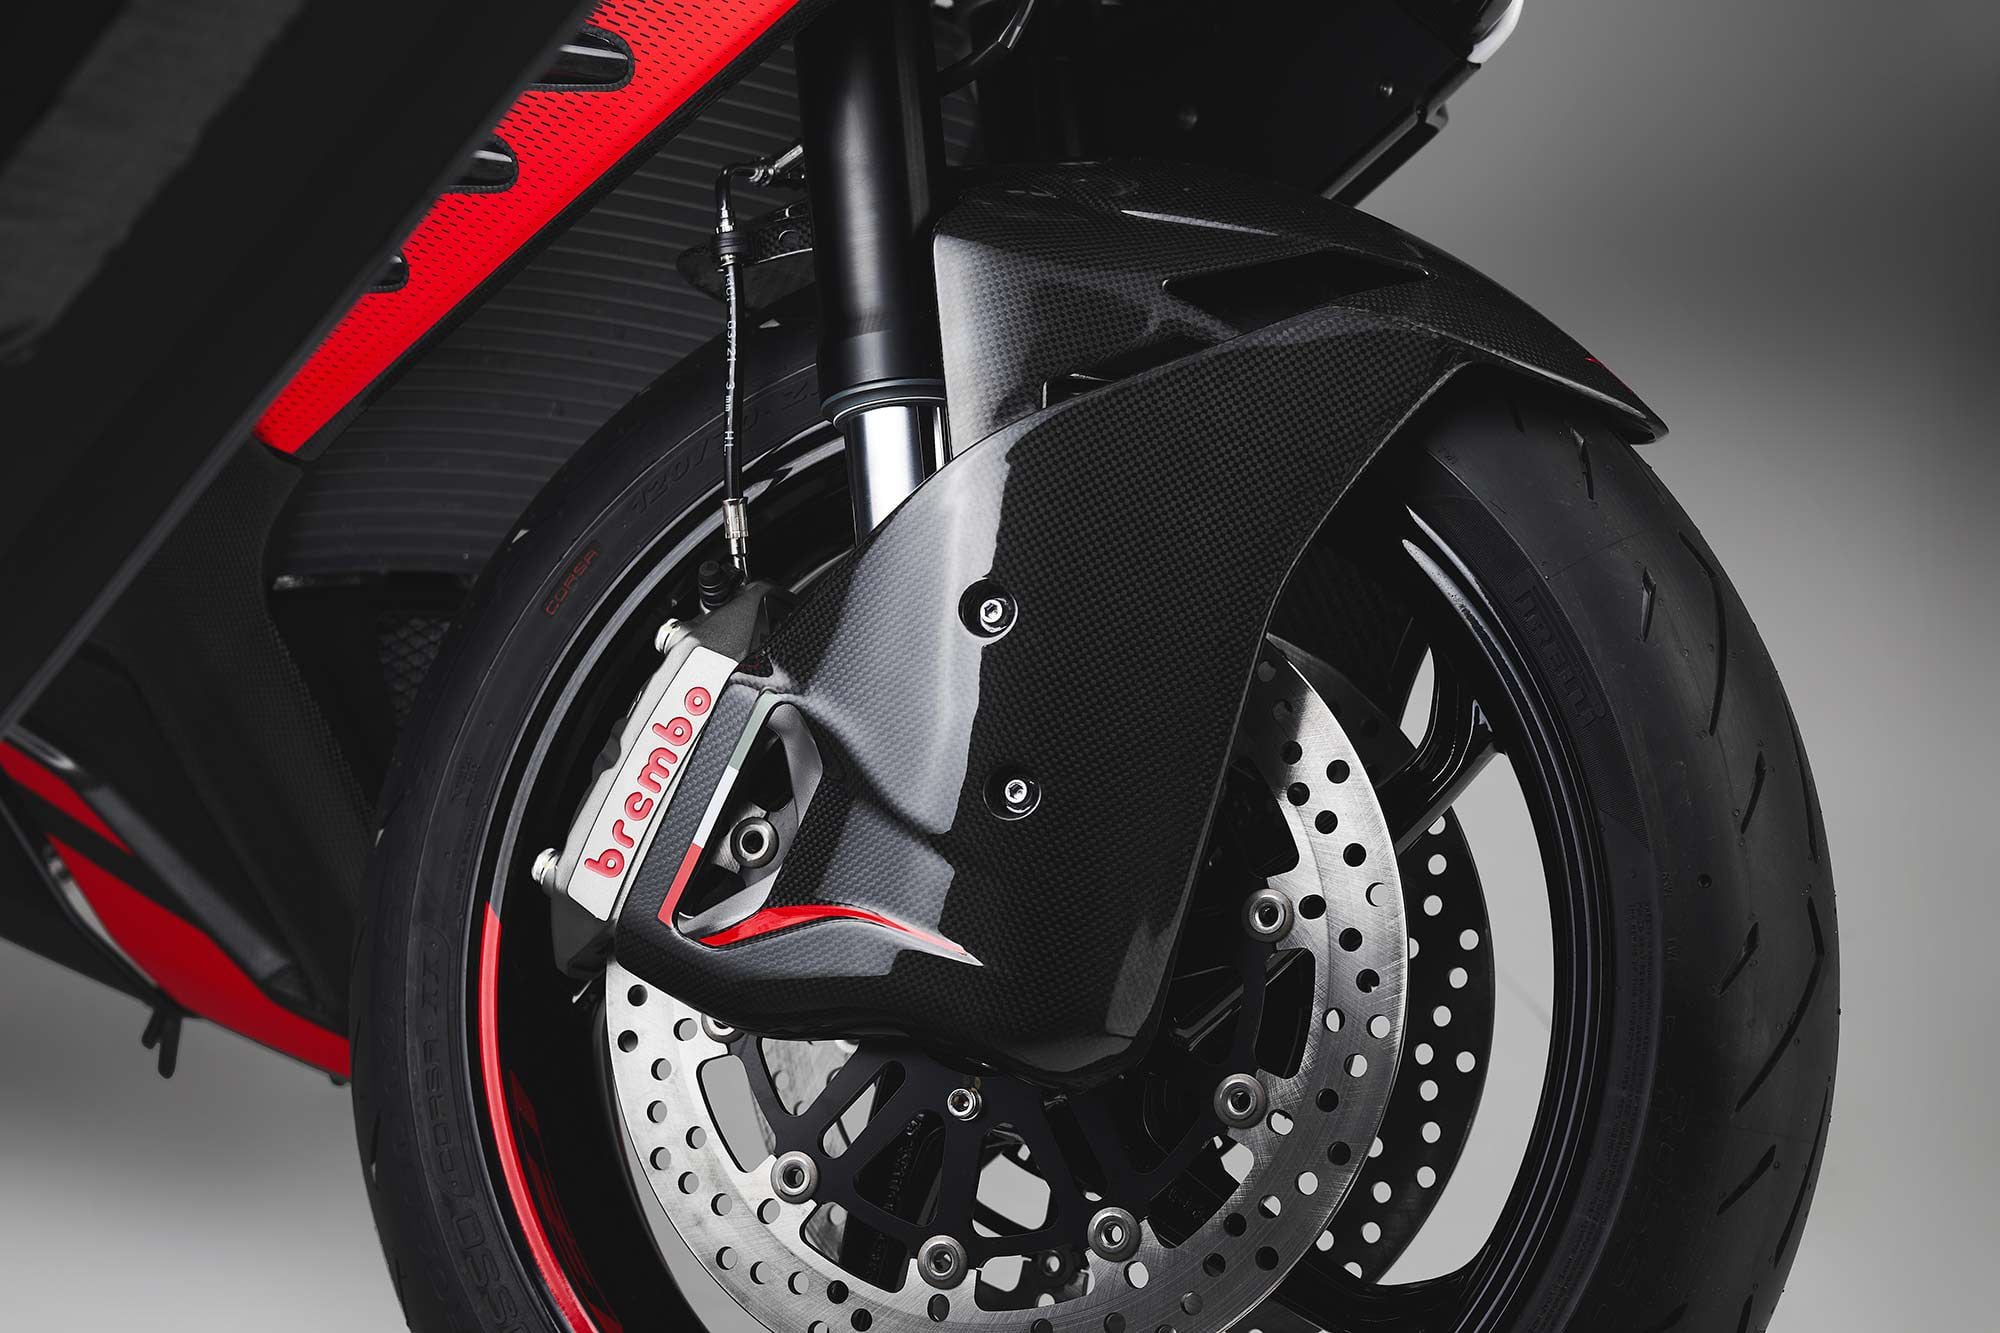 Why doesn’t everyone do this? Radially mounted four-piston Brembo brakes in a Monoblock caliper blend seamlessly into the MV F3 RR’s new carbon fiber front fender. The fender adds some serious aerodynamic improvement to the bike, and is a standout looker too.